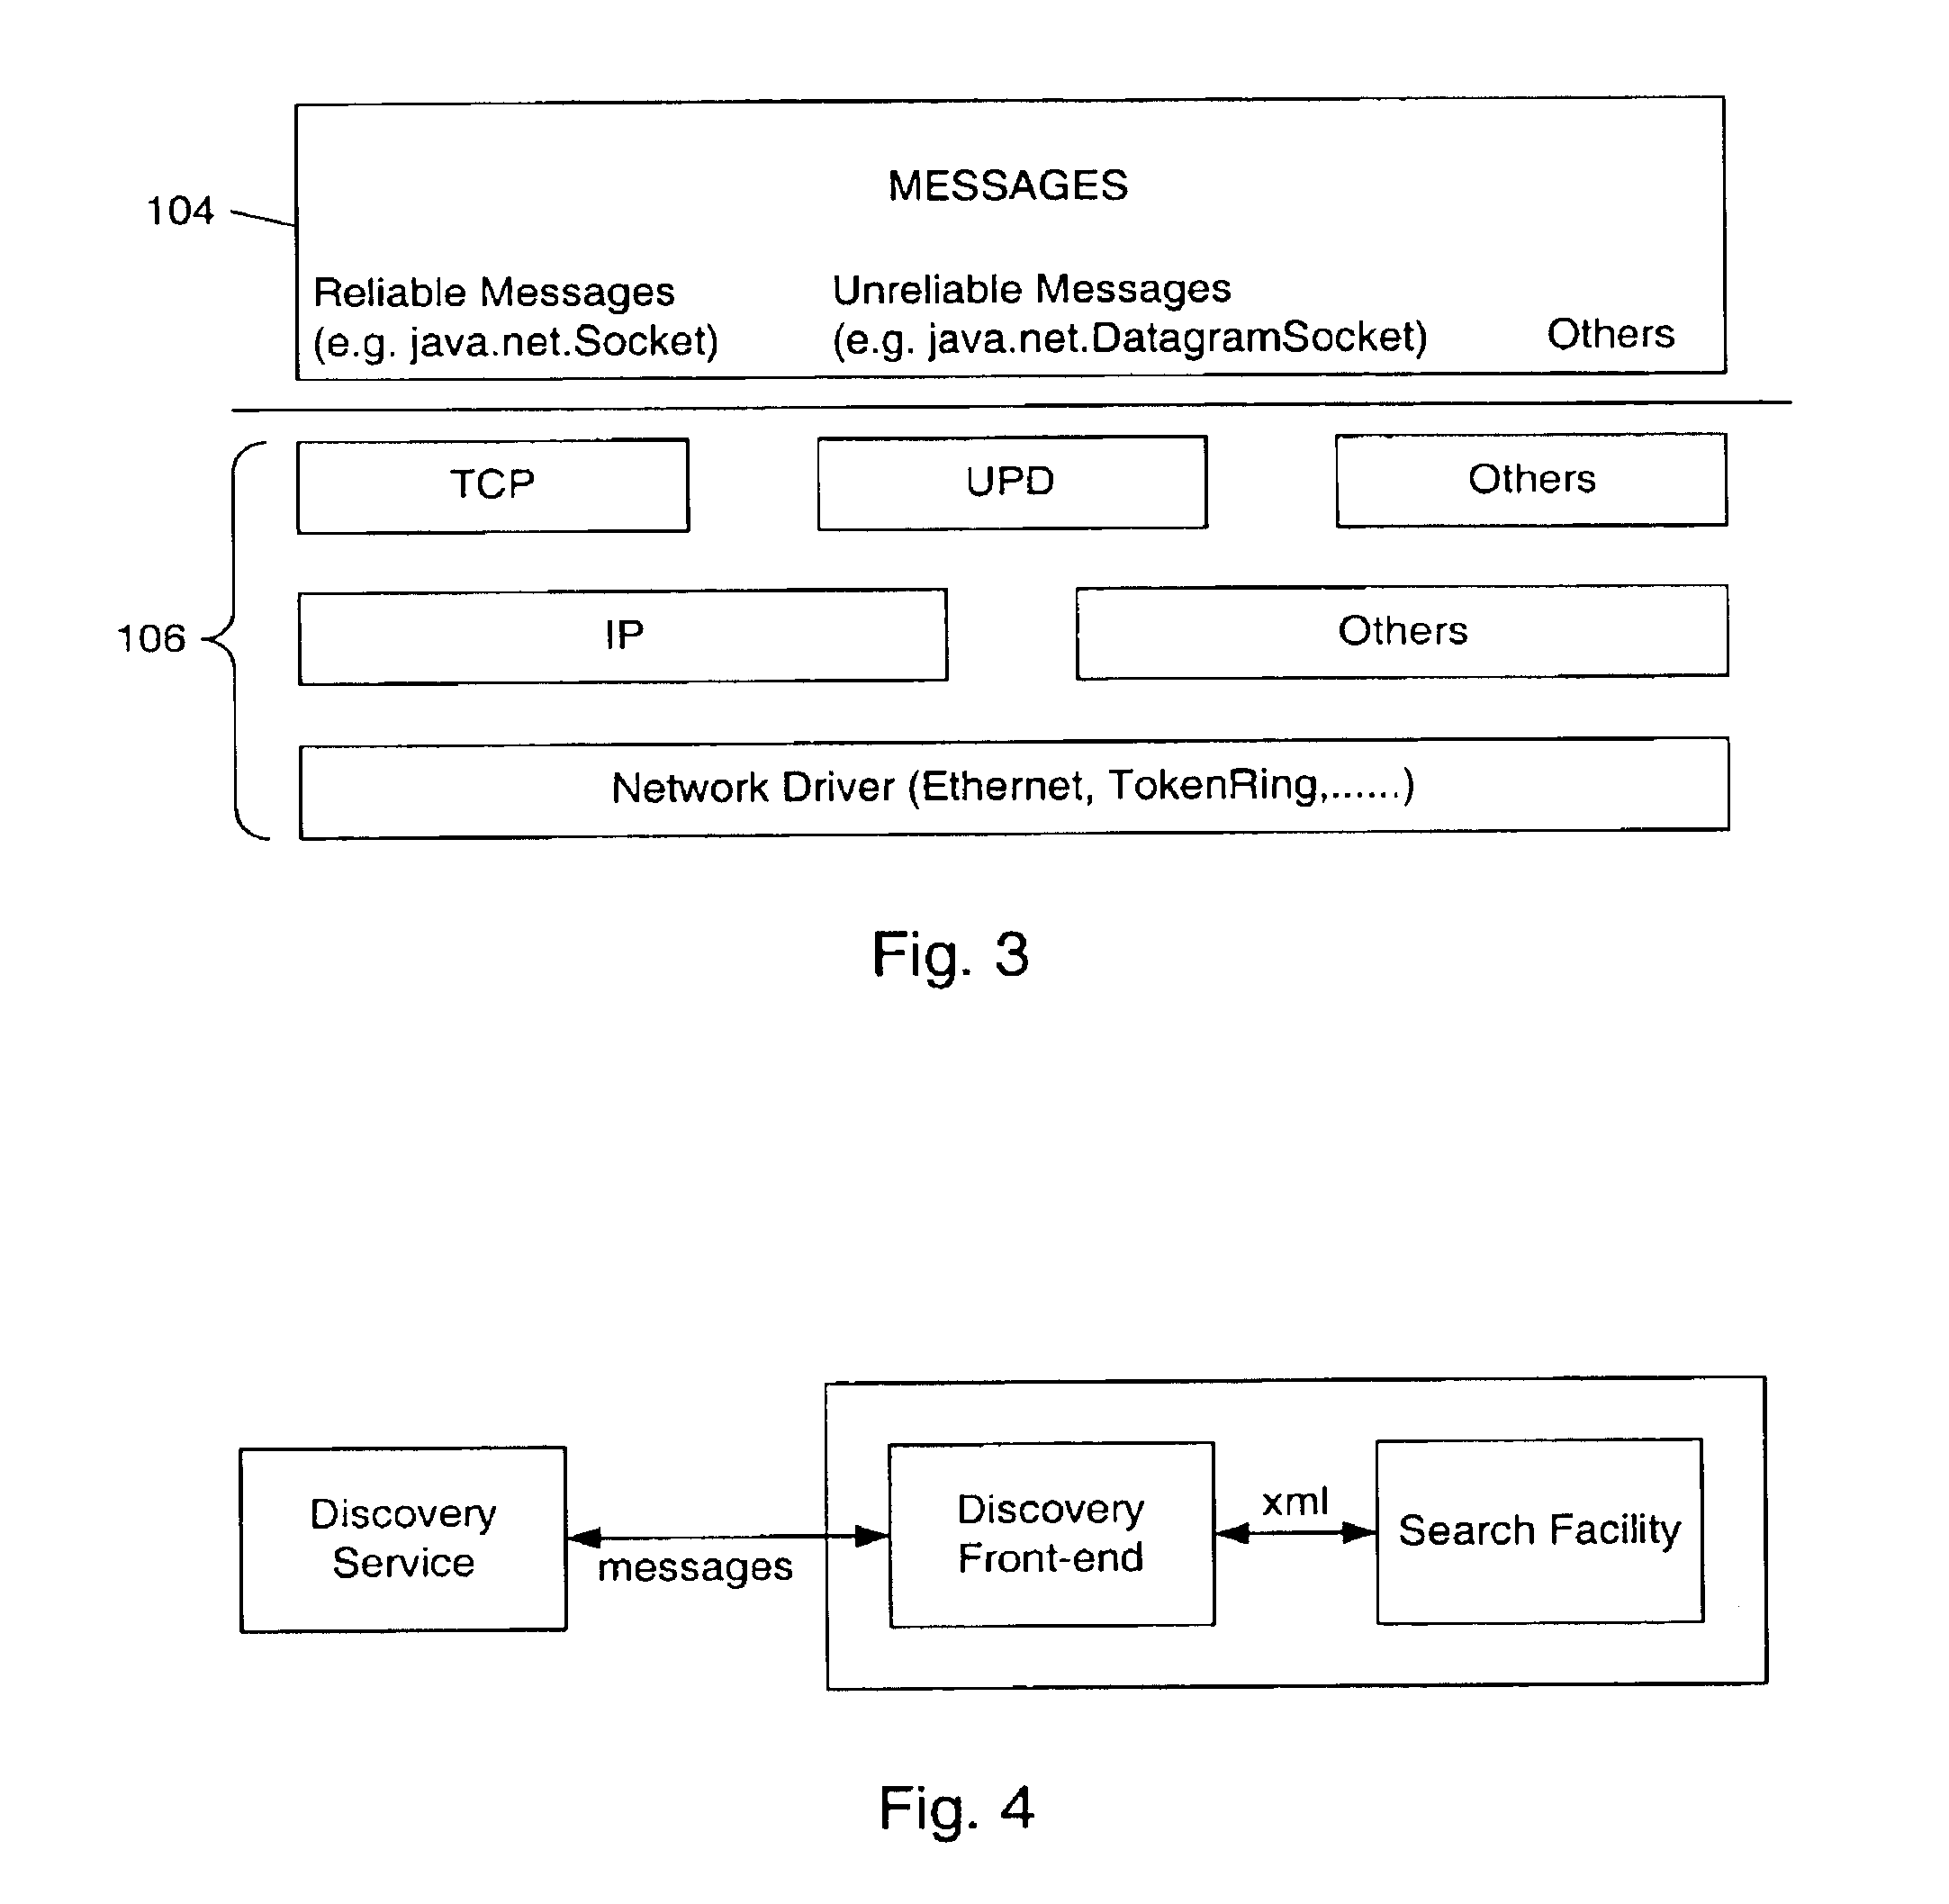 Client-specified display services in a distributed computing environment